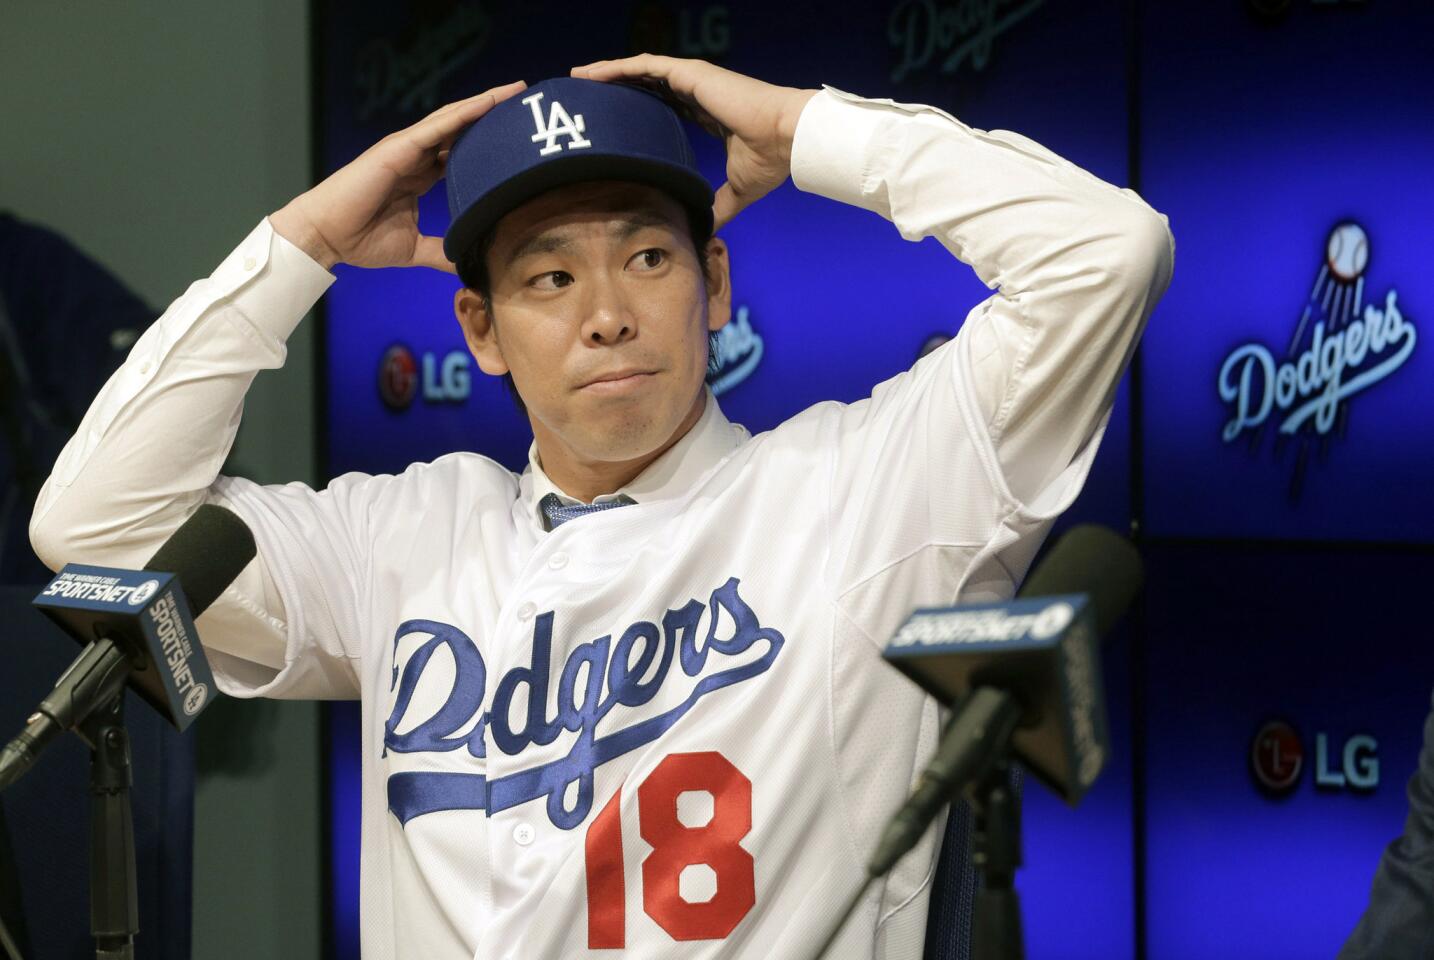 Newly signed Los Angeles Dodgers pitcher Kenta Maeda, from Japan, is introduced at a news conference in Los Angeles Thursday, Jan. 7, 2016. Maeda, 27, signed an eight-year contract with the baseball club that guarantees the right-hander $25 million, but he can earn more than $100 million during the length of the deal if he meets all performance incentives.(AP Photo/Nick Ut)